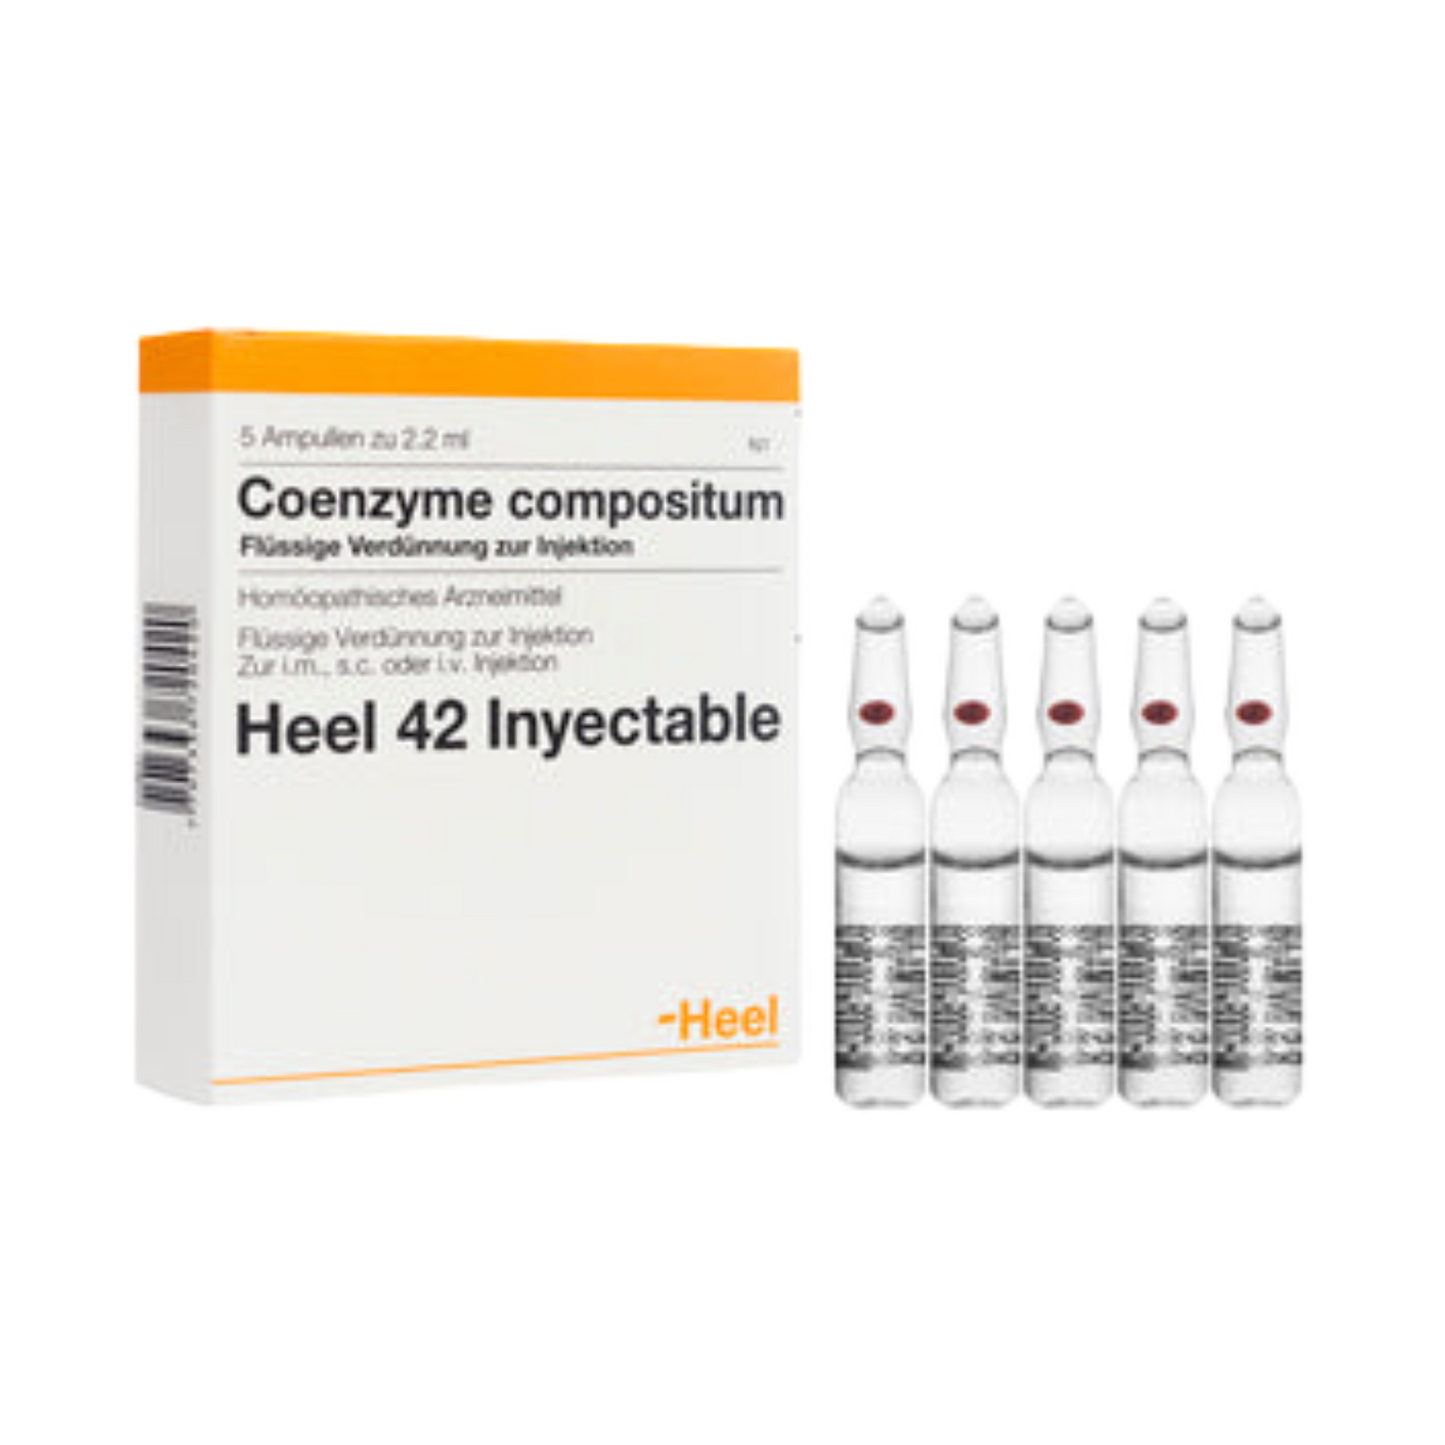 COENZYME COMPOSITUM AMPOULES